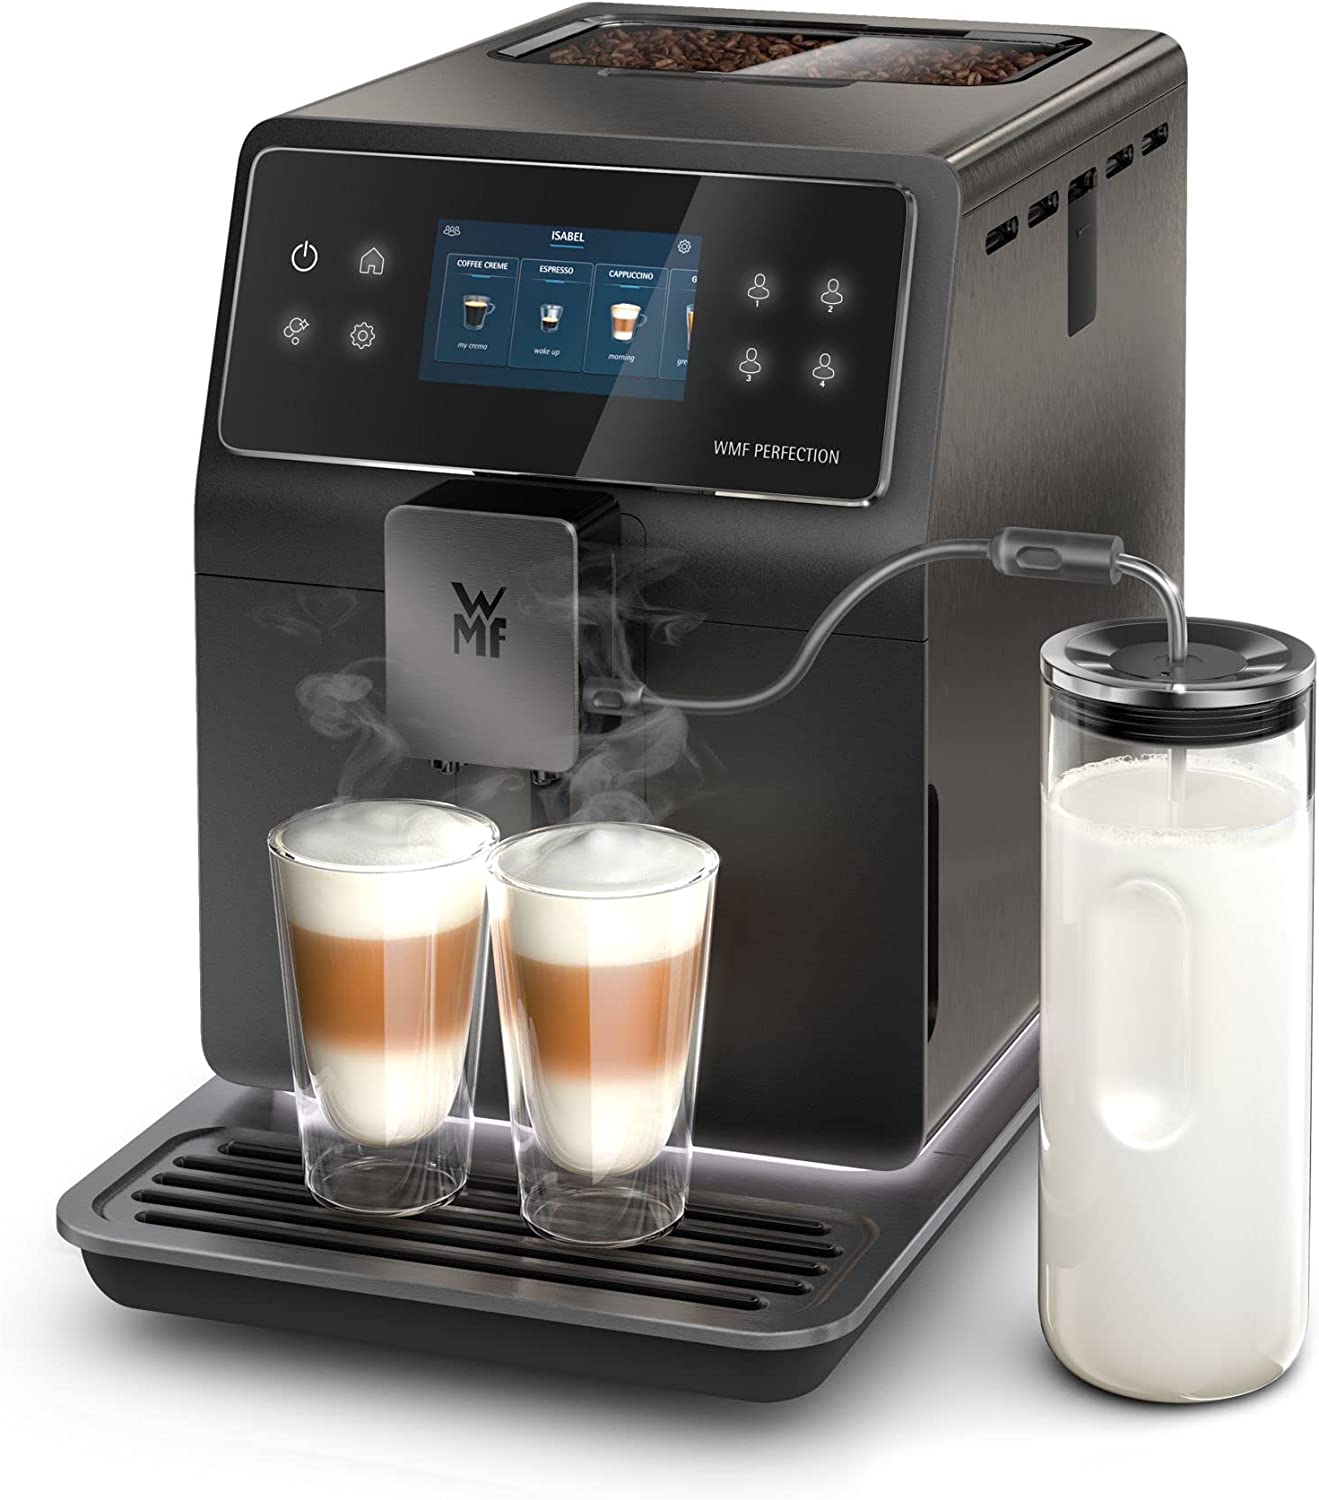 WMF Perfection 890L Fully Automatic Coffee Machine with Milk System, 18 Drink Specialities, Double Thermal Block, Stainless Steel Grinder, User Profile, 1 L Milk Container